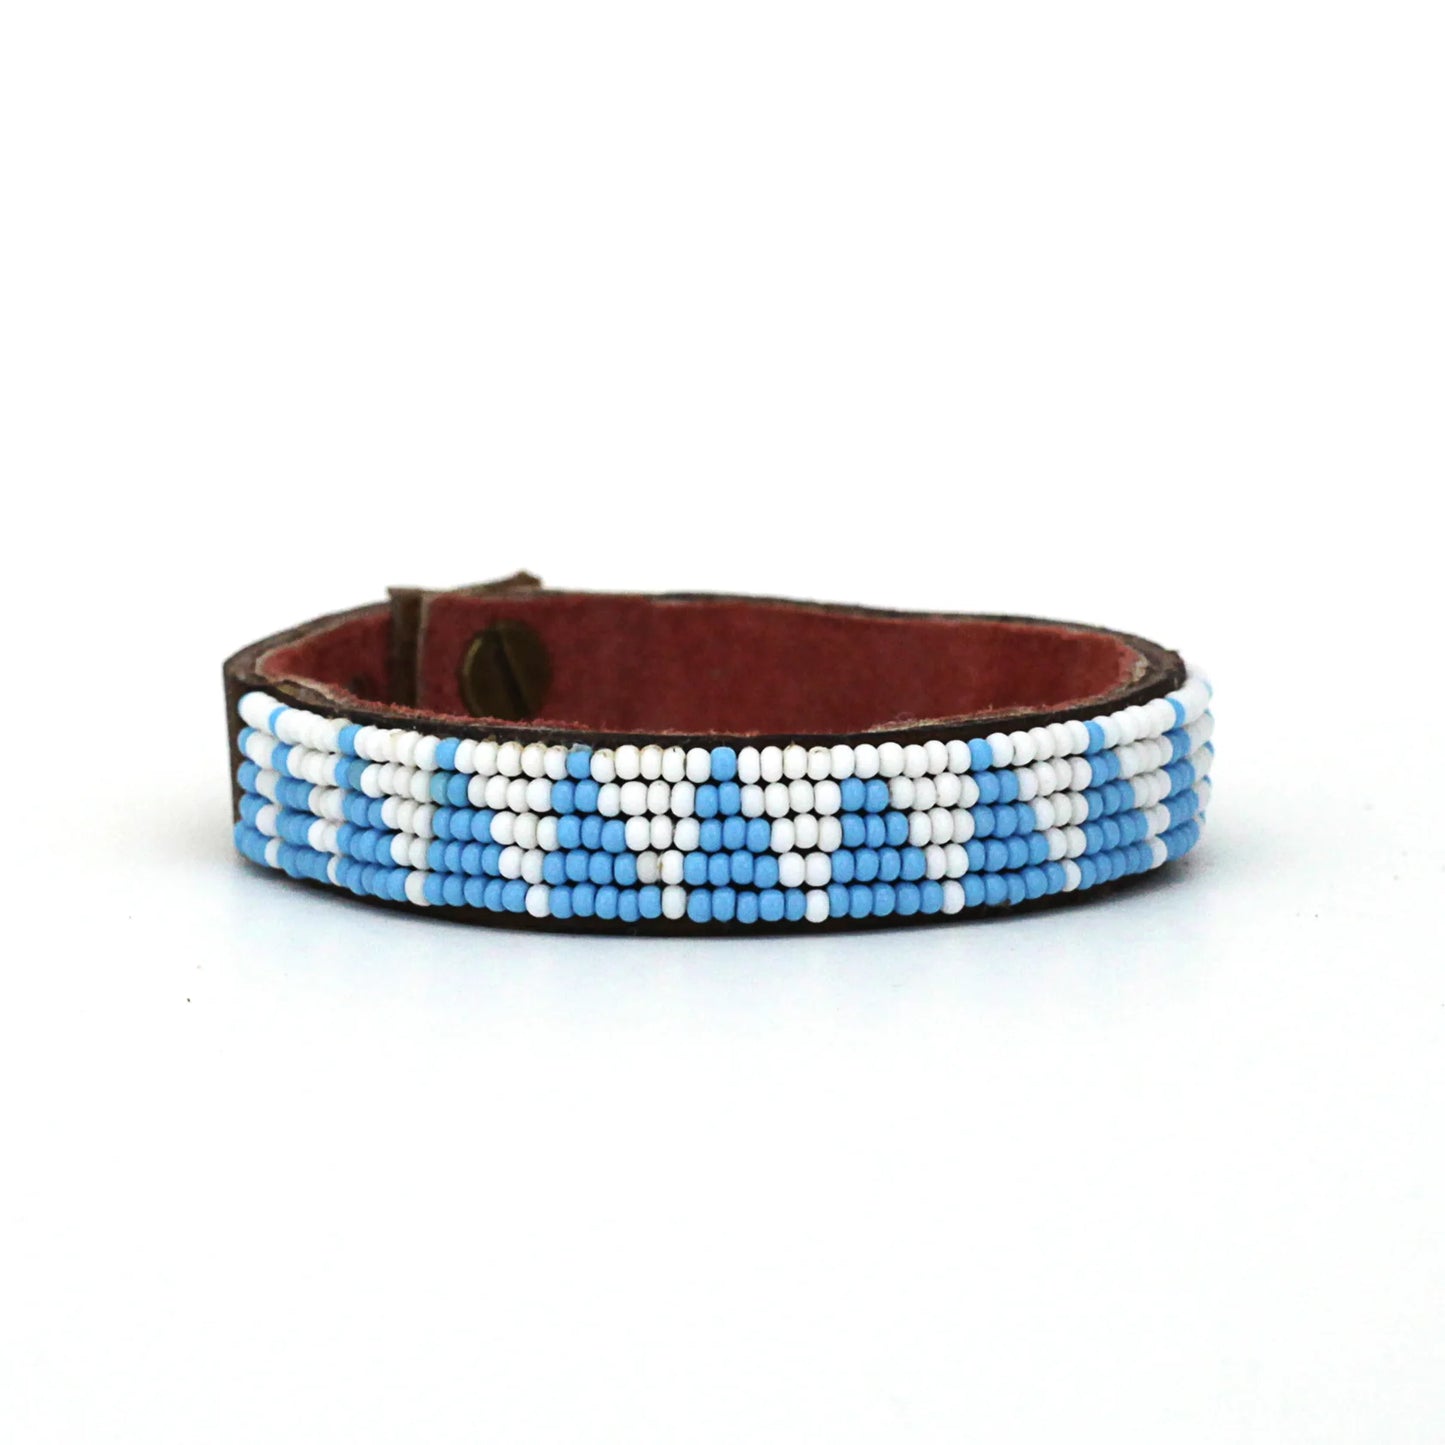 Small Beaded Leather Cuff